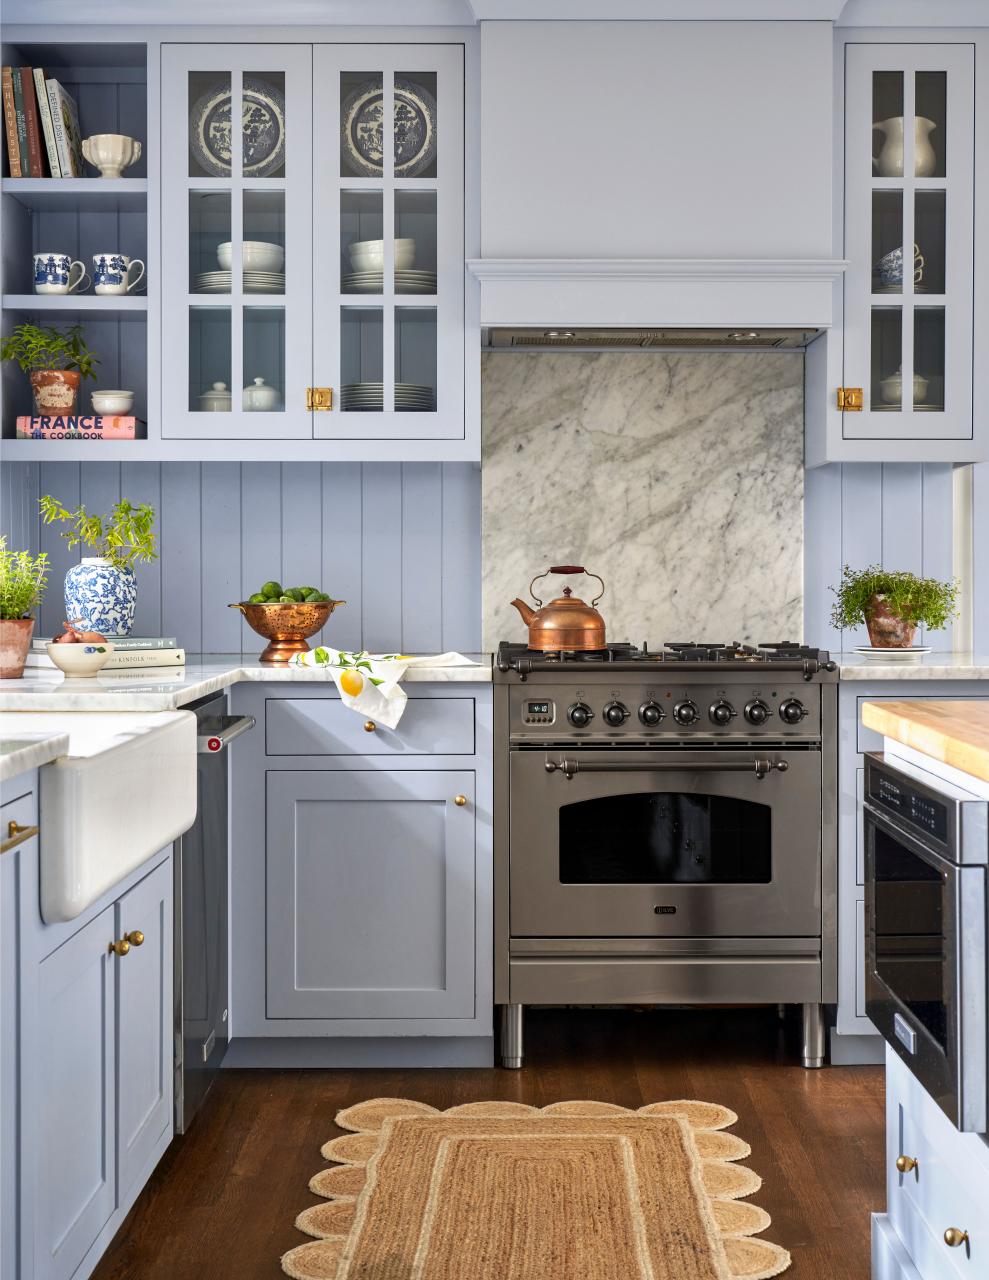 Should You Spray or Brush-Paint Cabinets? Here’s What the Pros Recommend